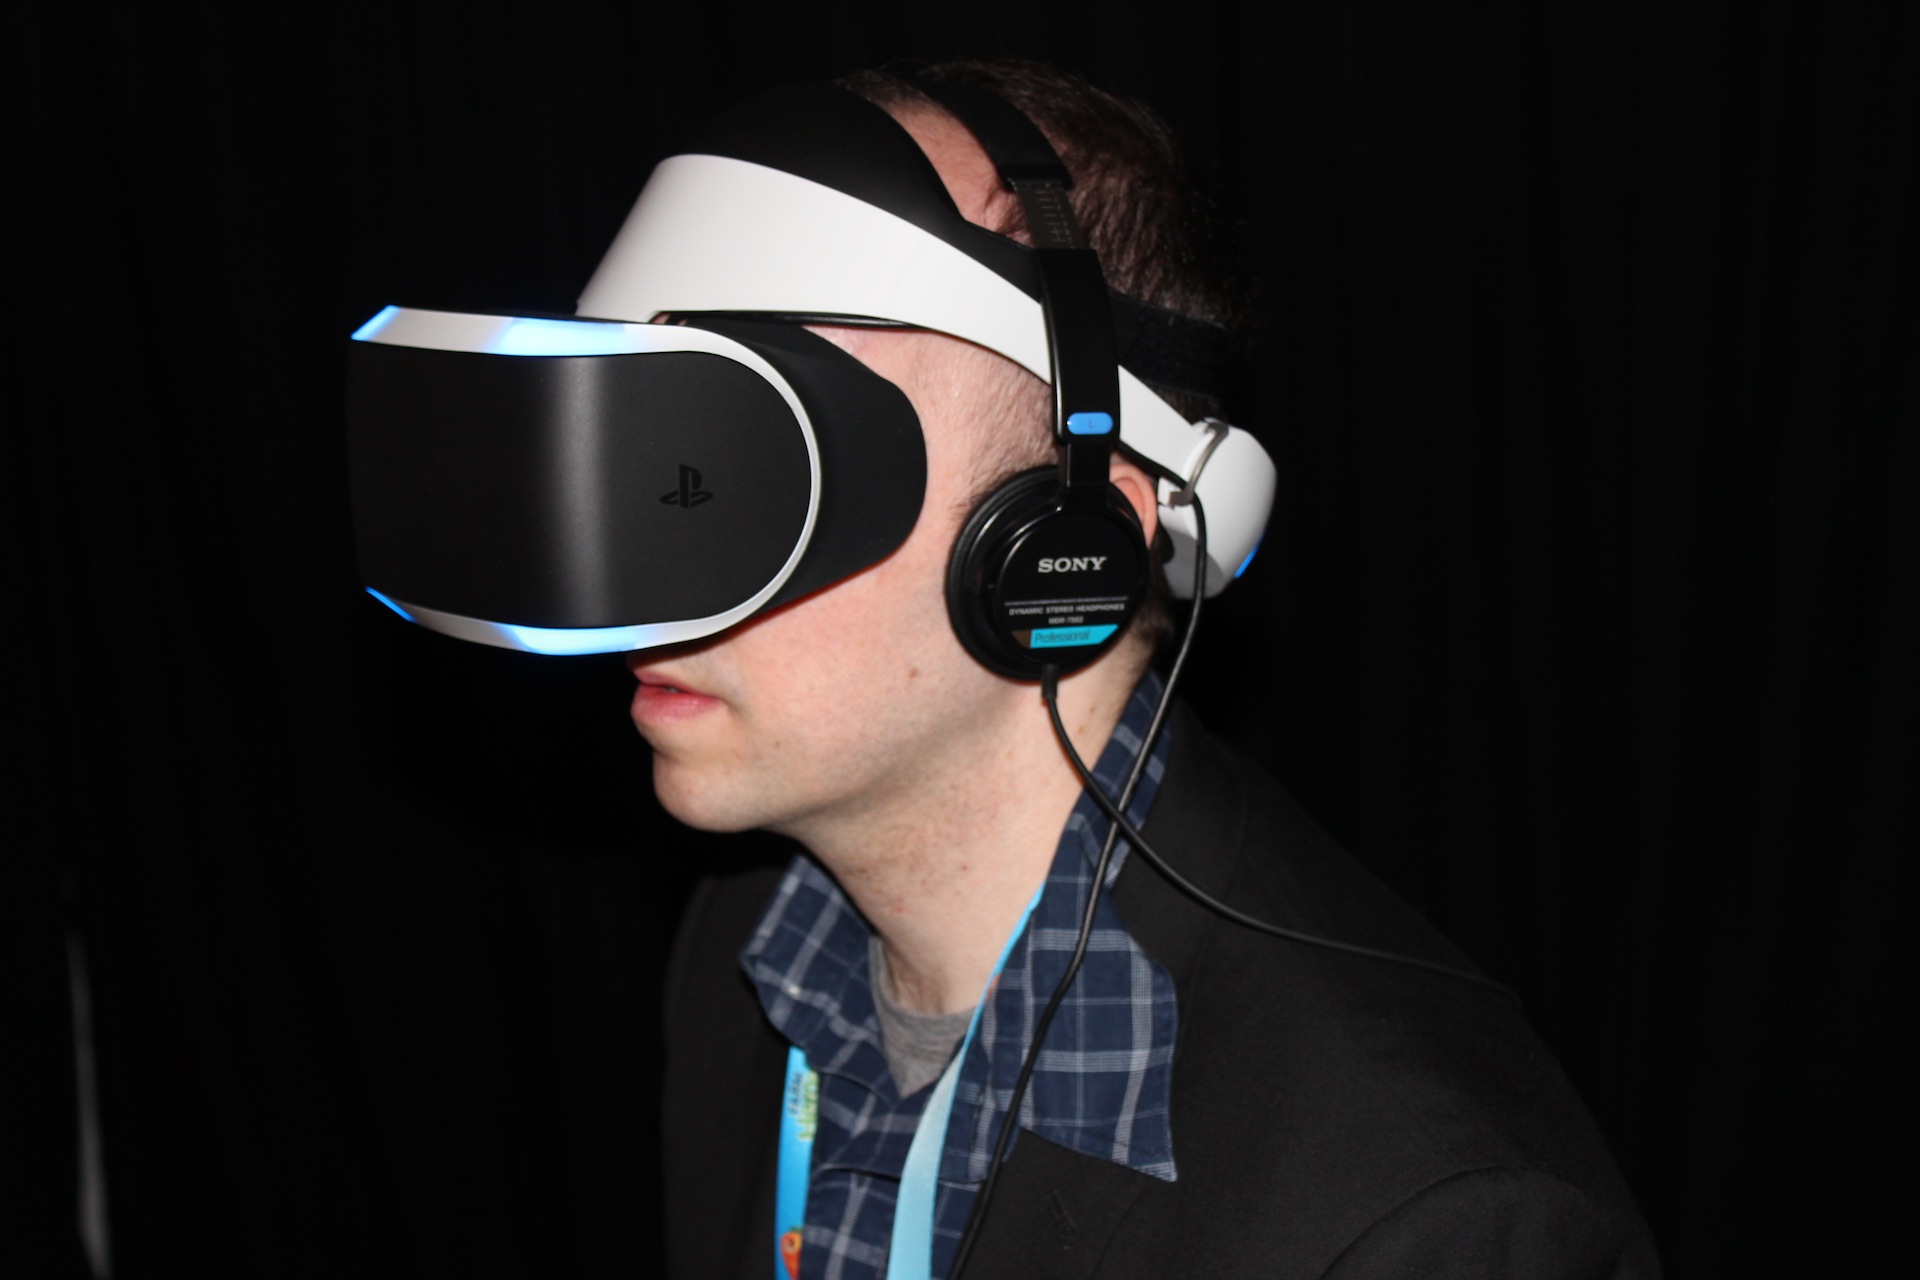 We Just Tried Sony’s PS4 Virtual Reality Headset. We Like It.